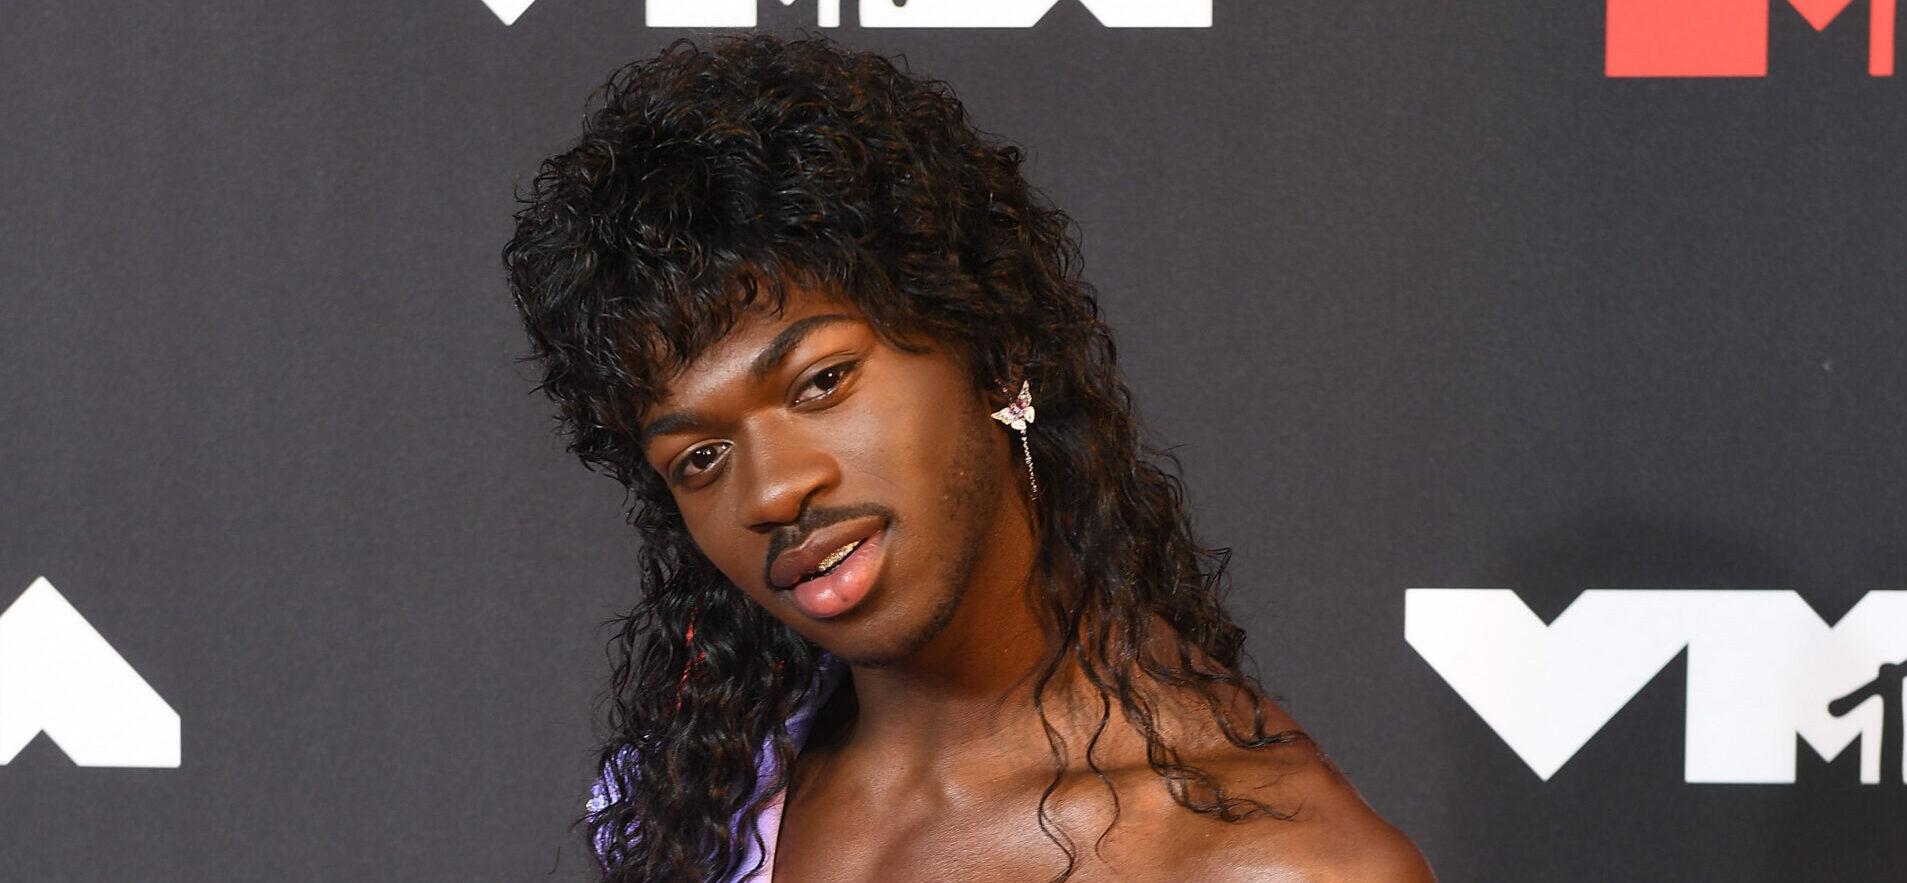 Lil Nas X Reacts To Exclusion From 2022 BET Awards: ‘Black Gay People Have To Fight’